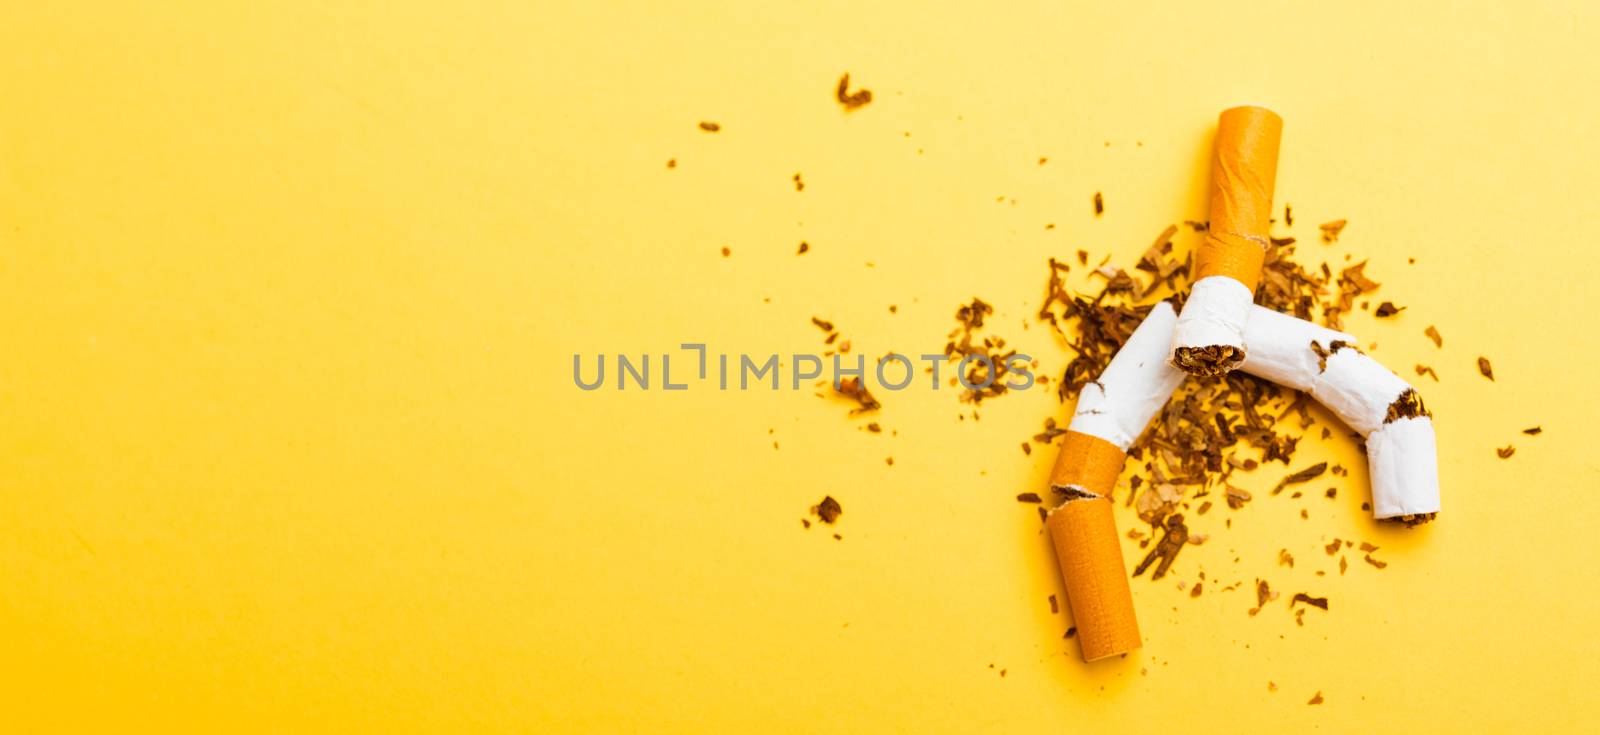 31 May of World No Tobacco Day, no smoking, close up of broken pile cigarette or tobacco STOP symbolic on yellow background with banner copy space, and Warning lung health concept